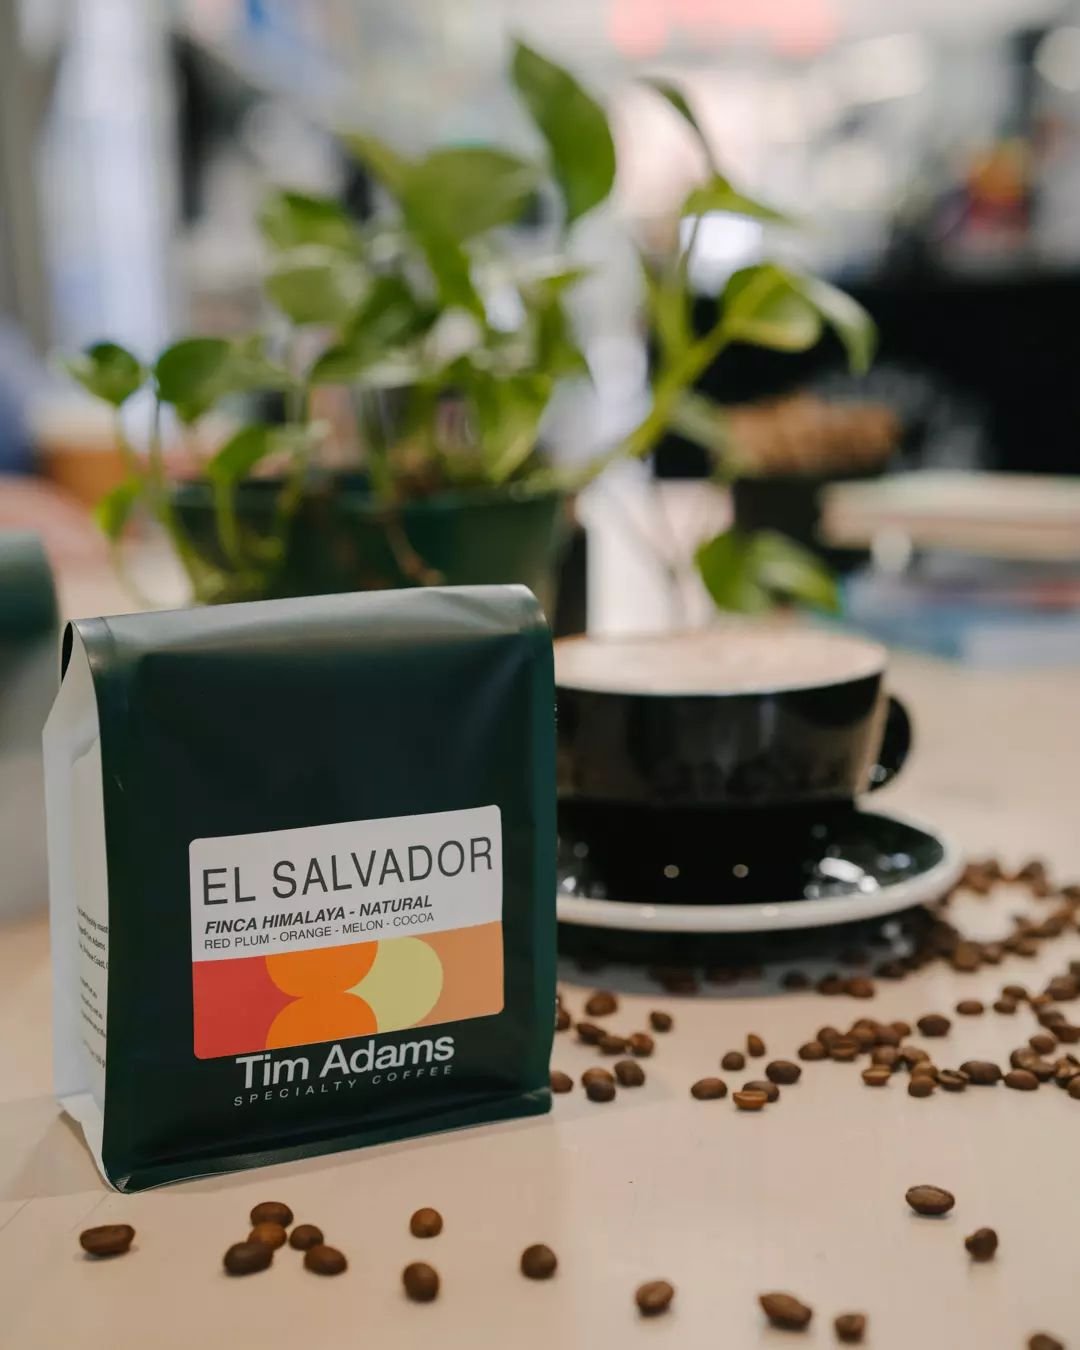 Discover the rich flavours of El Salvador with our Finca Himalaya single origin beans. ☕💼 Perfect for your home brewing adventures. Find it in-store or click the link in our bio to shop online! 

#CoffeeBlend #ElSalvadorCoffee #HomeBarista #ConceptC